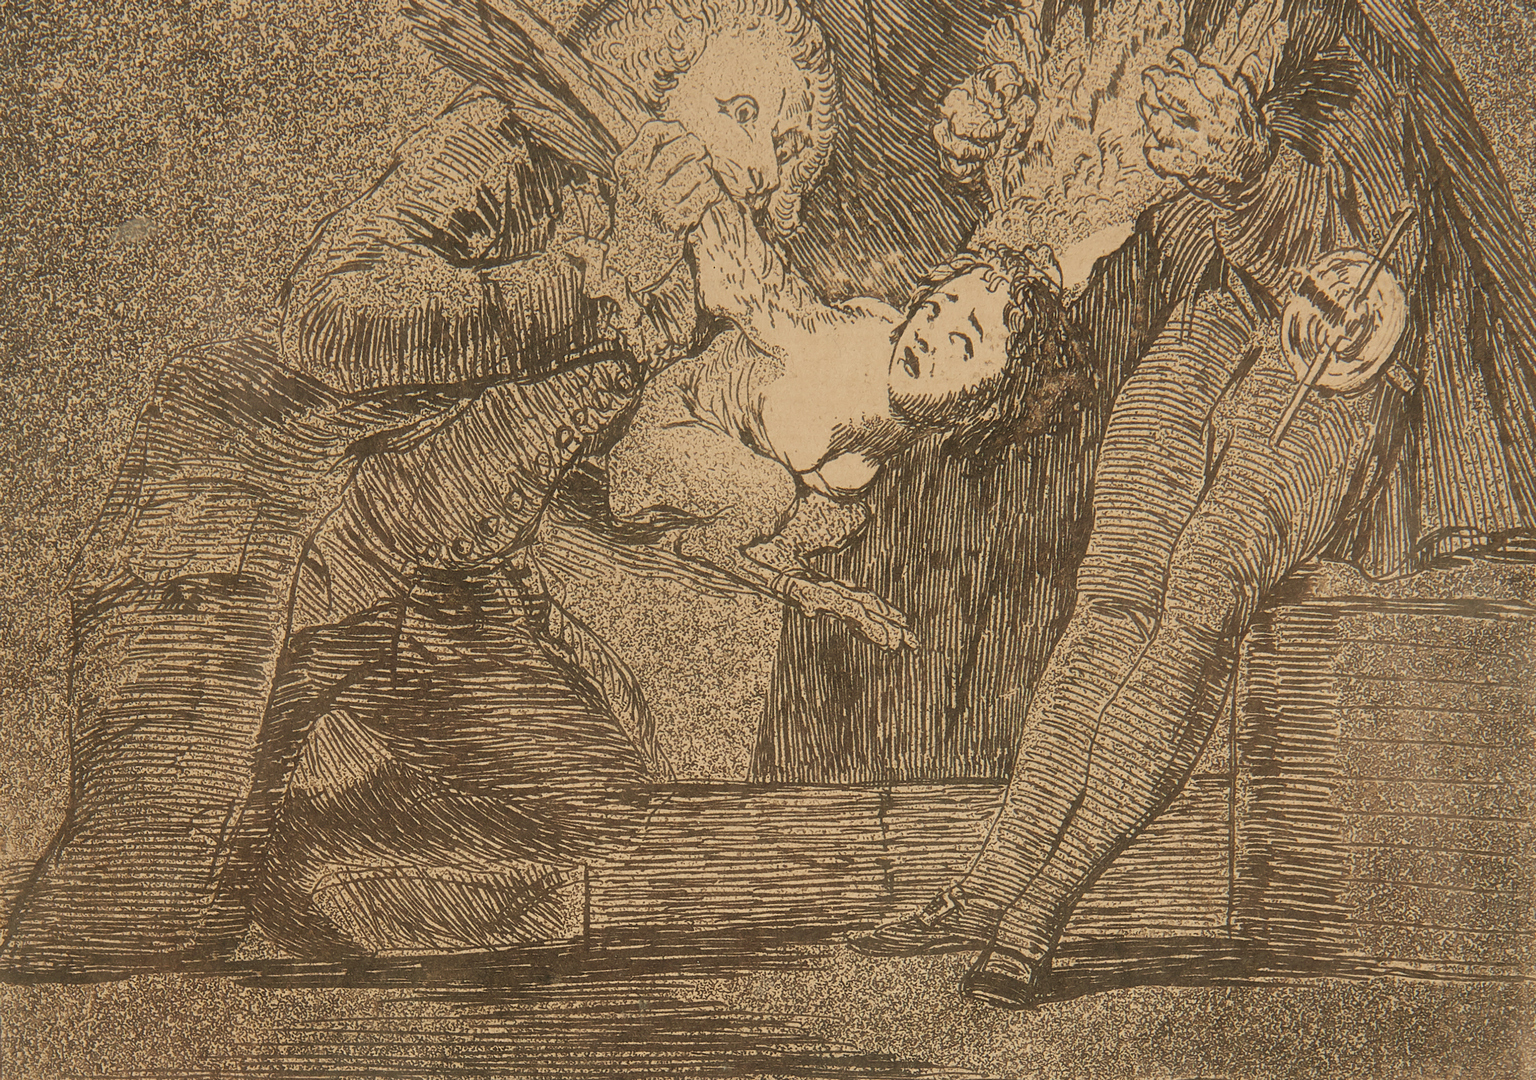 Lot 107: 3 Etchings After Rembrandt and Goya